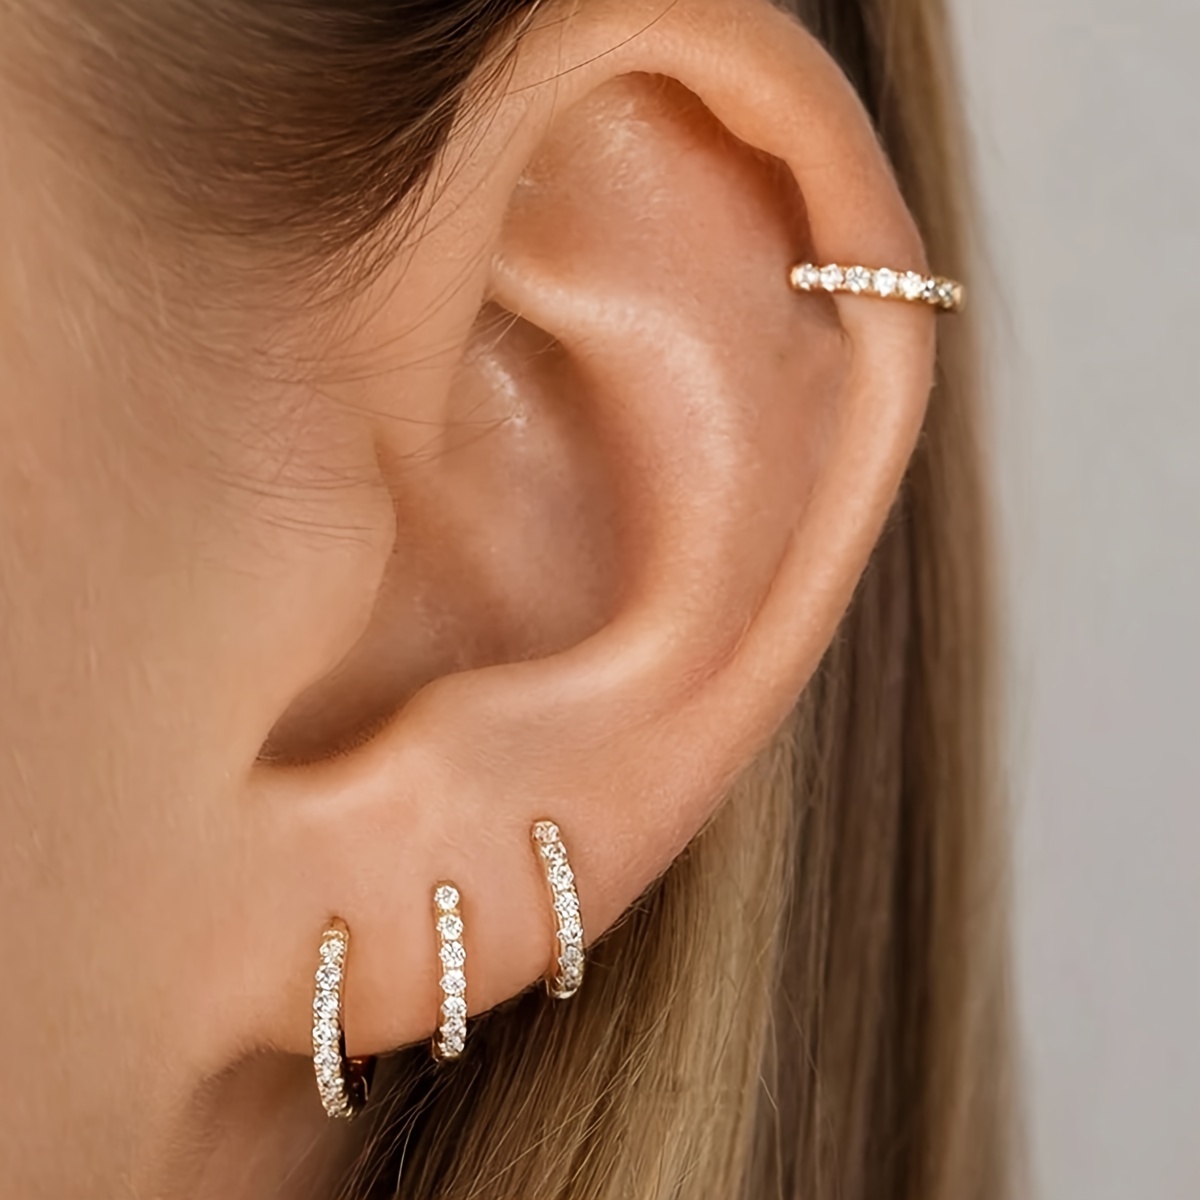 

4 Pairs Set Of Tiny Hoop Earrings Copper Jewelry Embellished With Shiny Rhinestones Elegant Leisure Style Trendy Female Gift Without Box